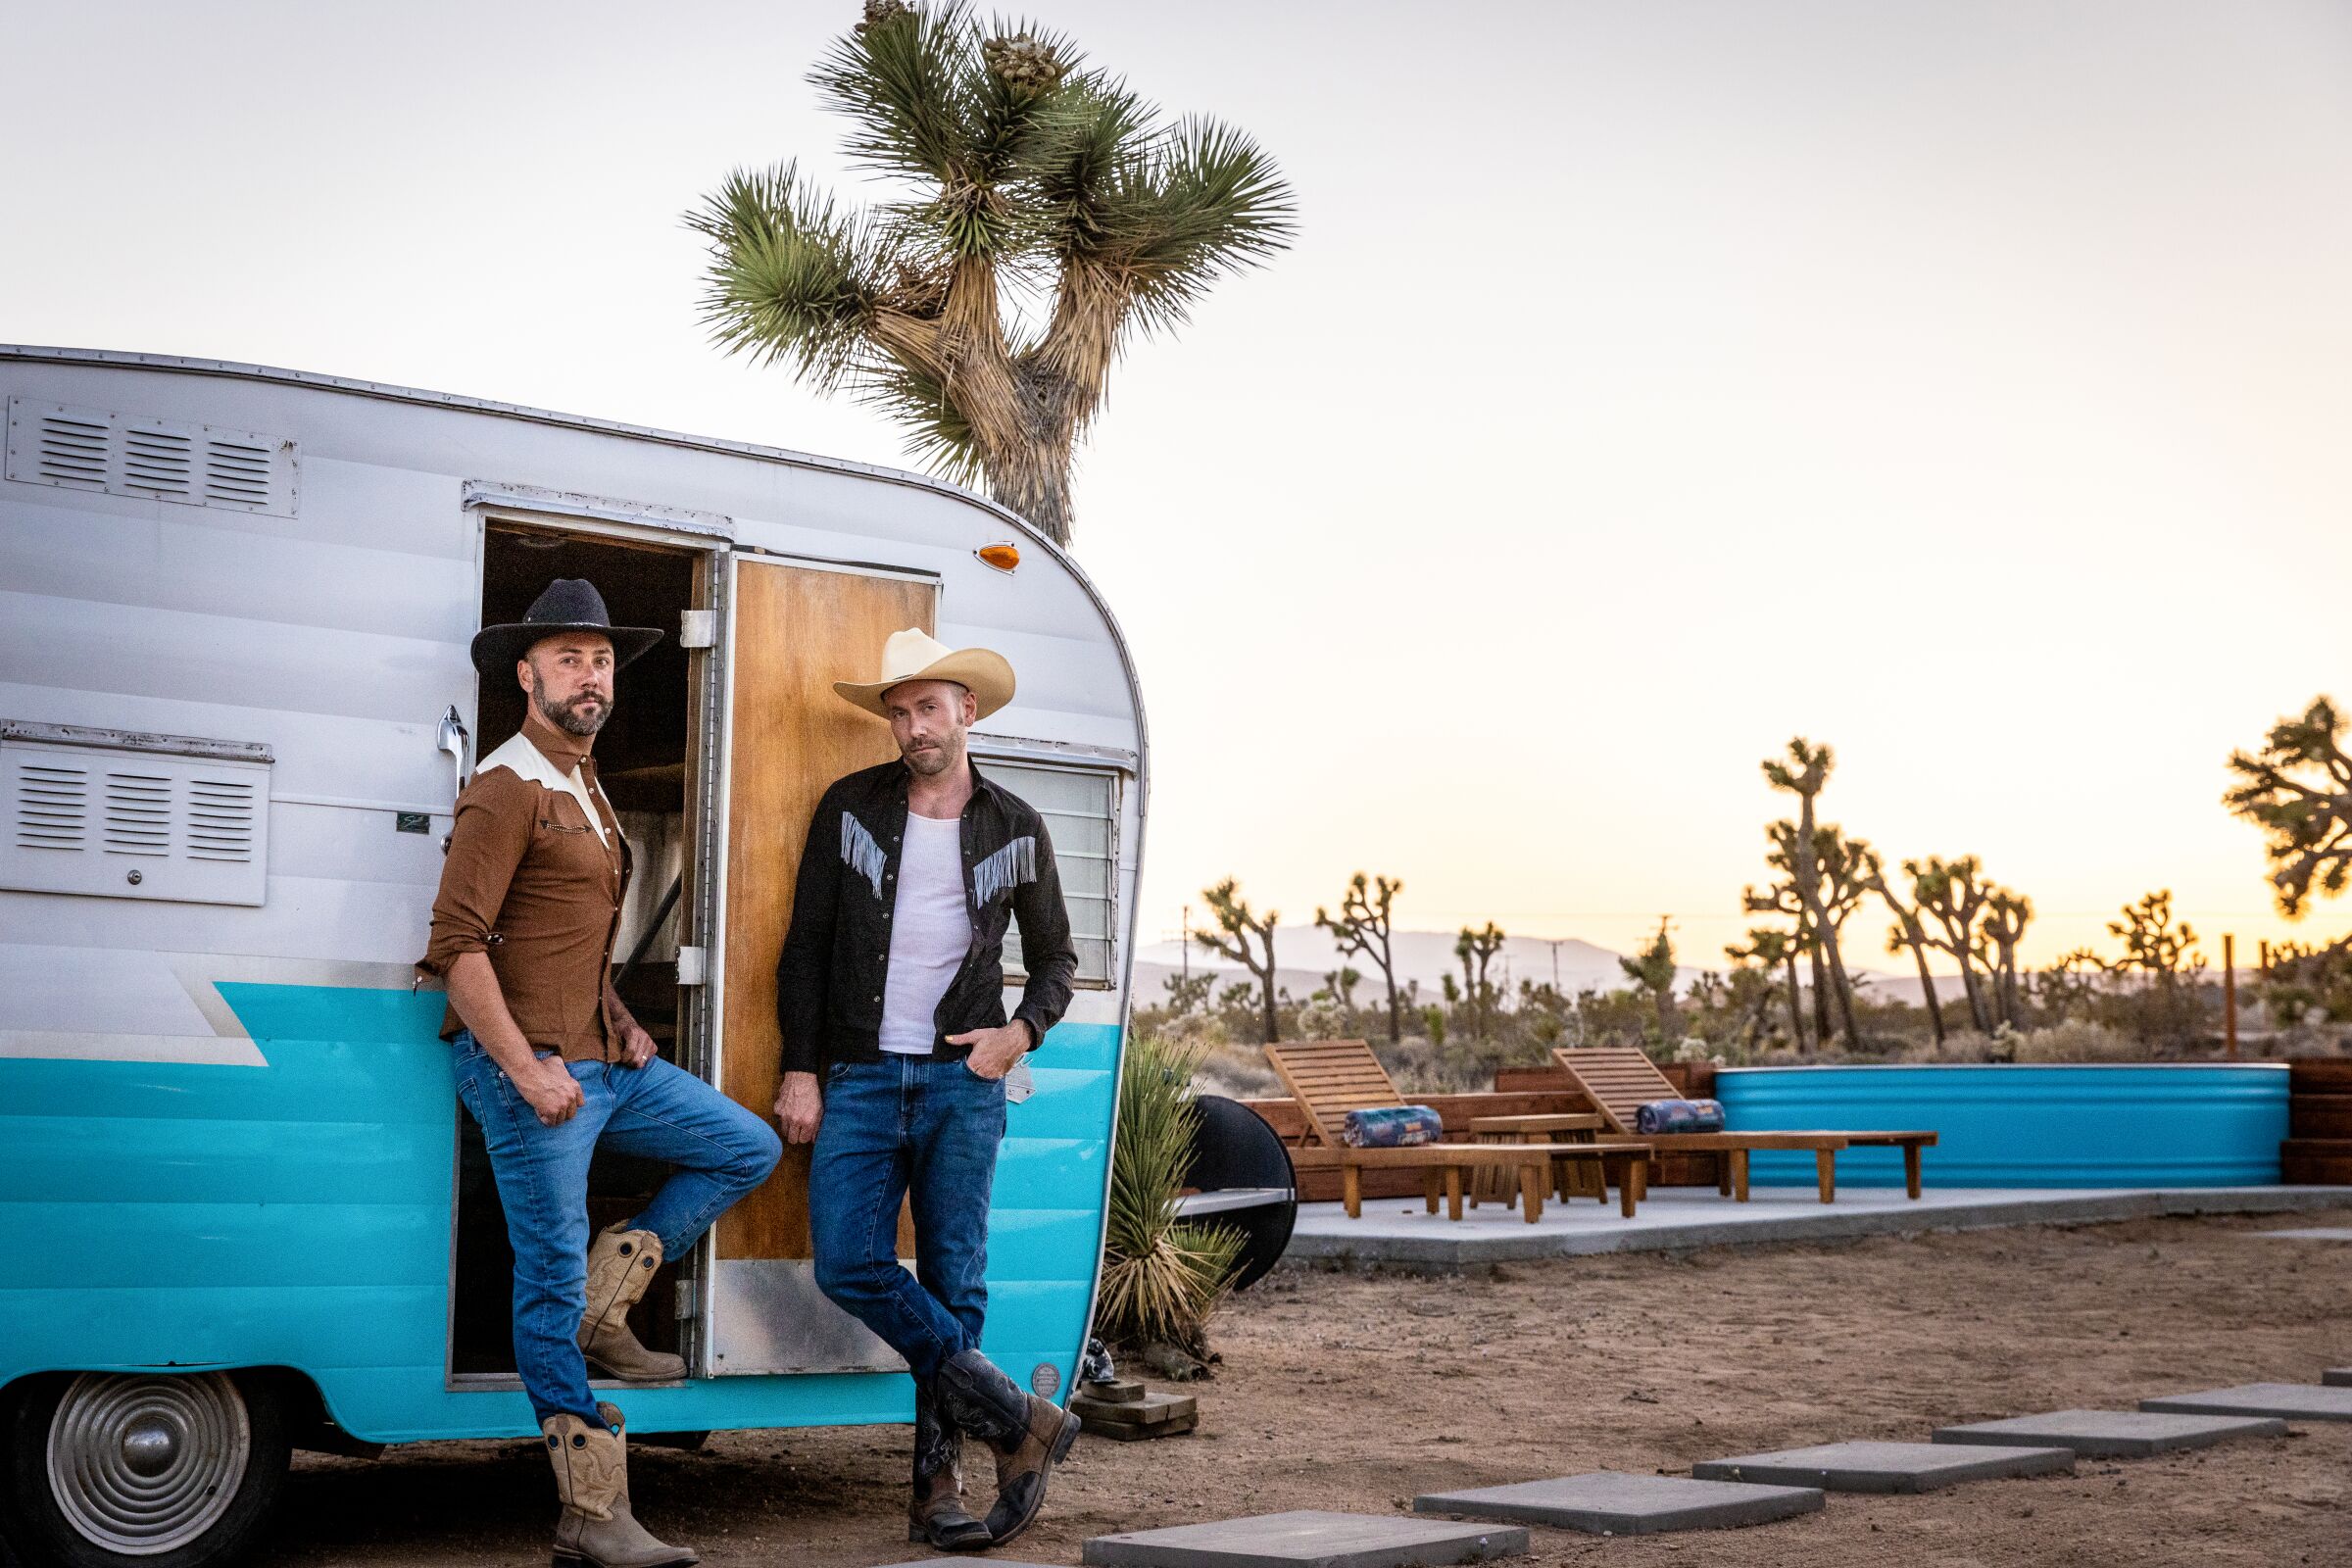 Two men in western garb and cowboy hats stand in front of a camper next to a stock tank pool.